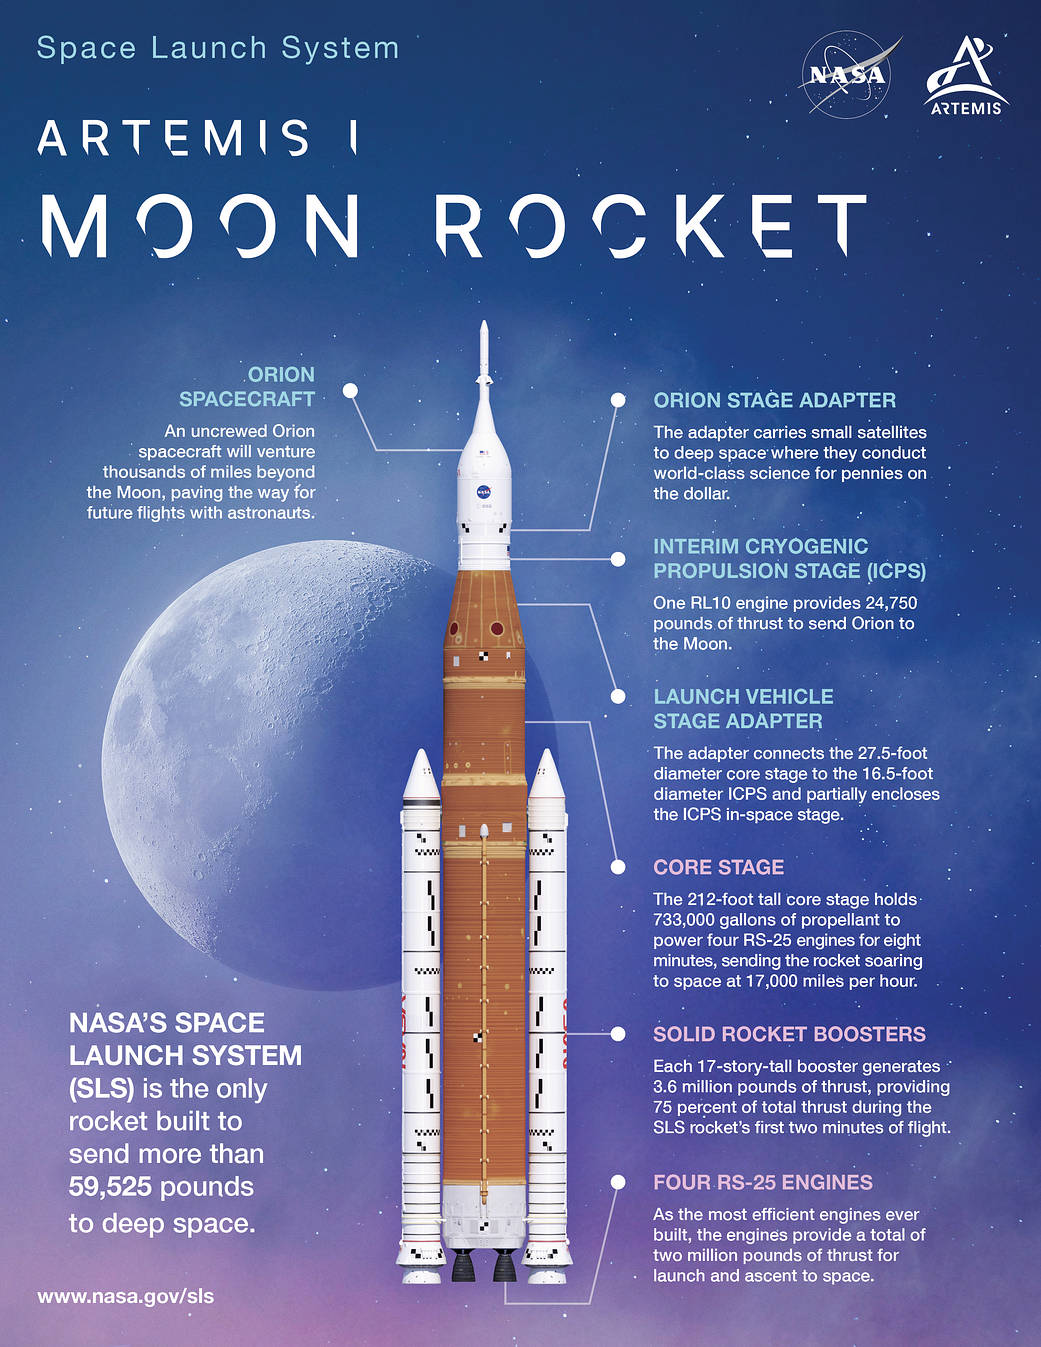 NASA’s Space Launch System (SLS) is the most powerful rocket NASA has ever built. It is the only rocket that can send the Orion spacecraft, astronauts, and supplies beyond Earth’s orbit to the Moon on a single mission